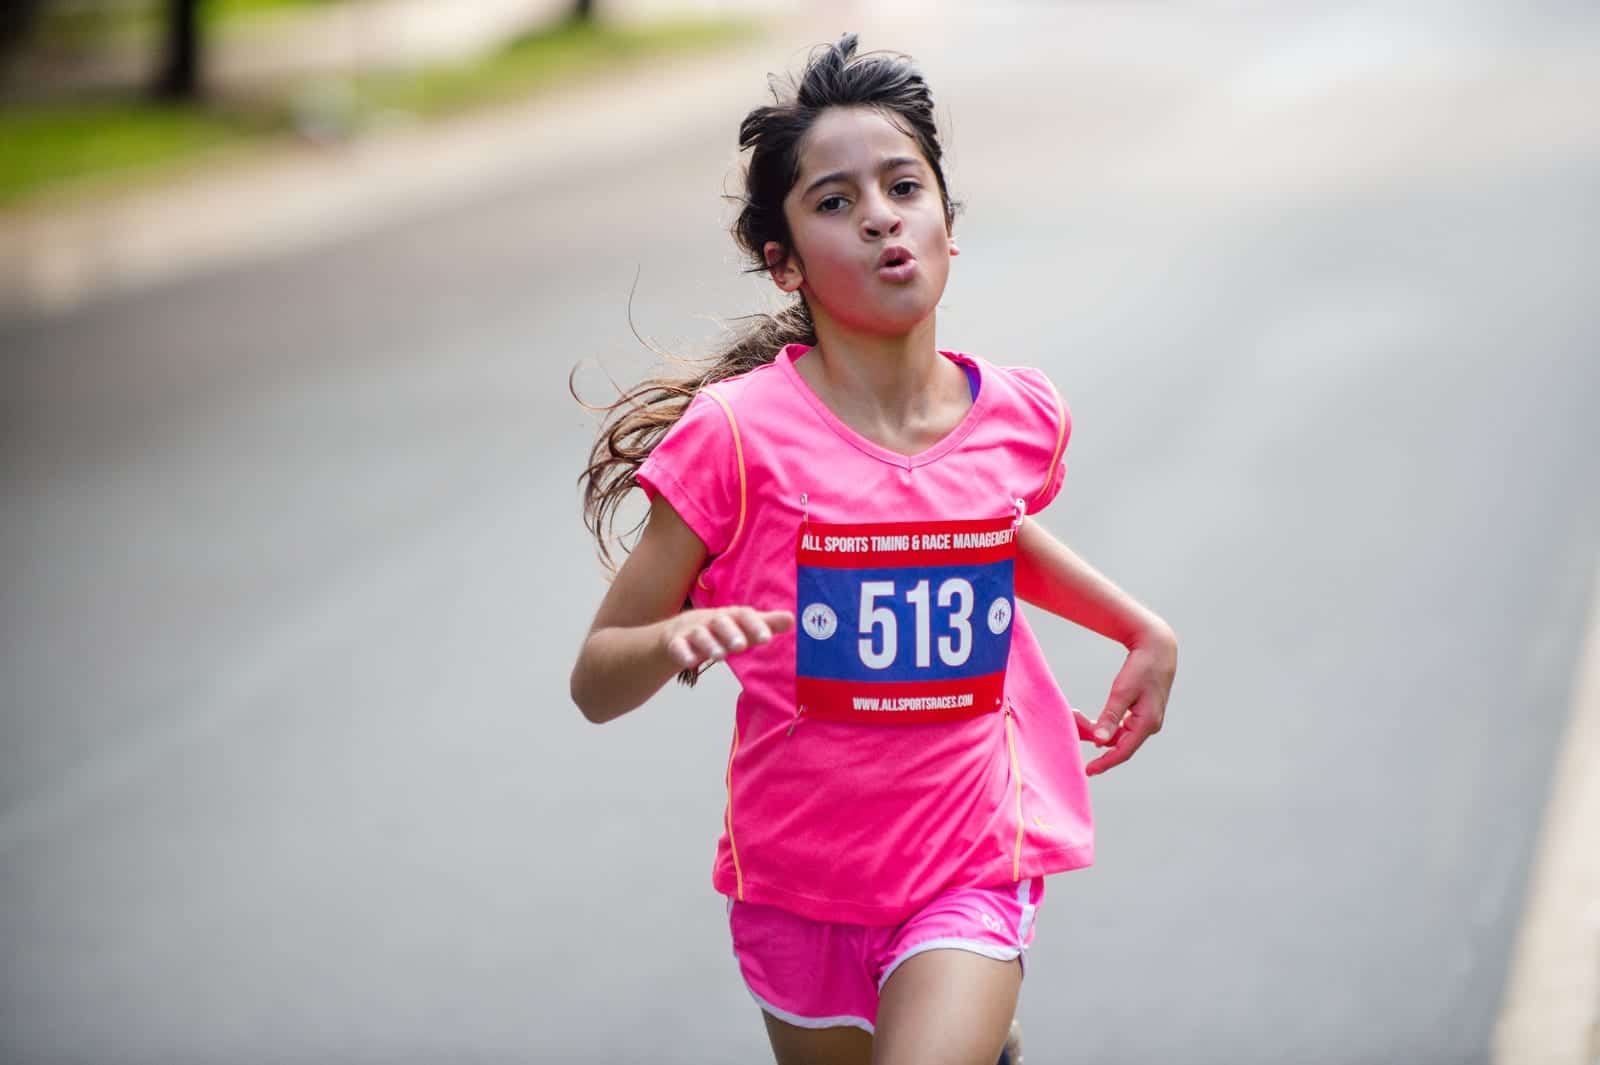 A young girl wearing a pink t-shirt and shorts runs very fast during a 5K race. Pittsburgh editorial event photographer.